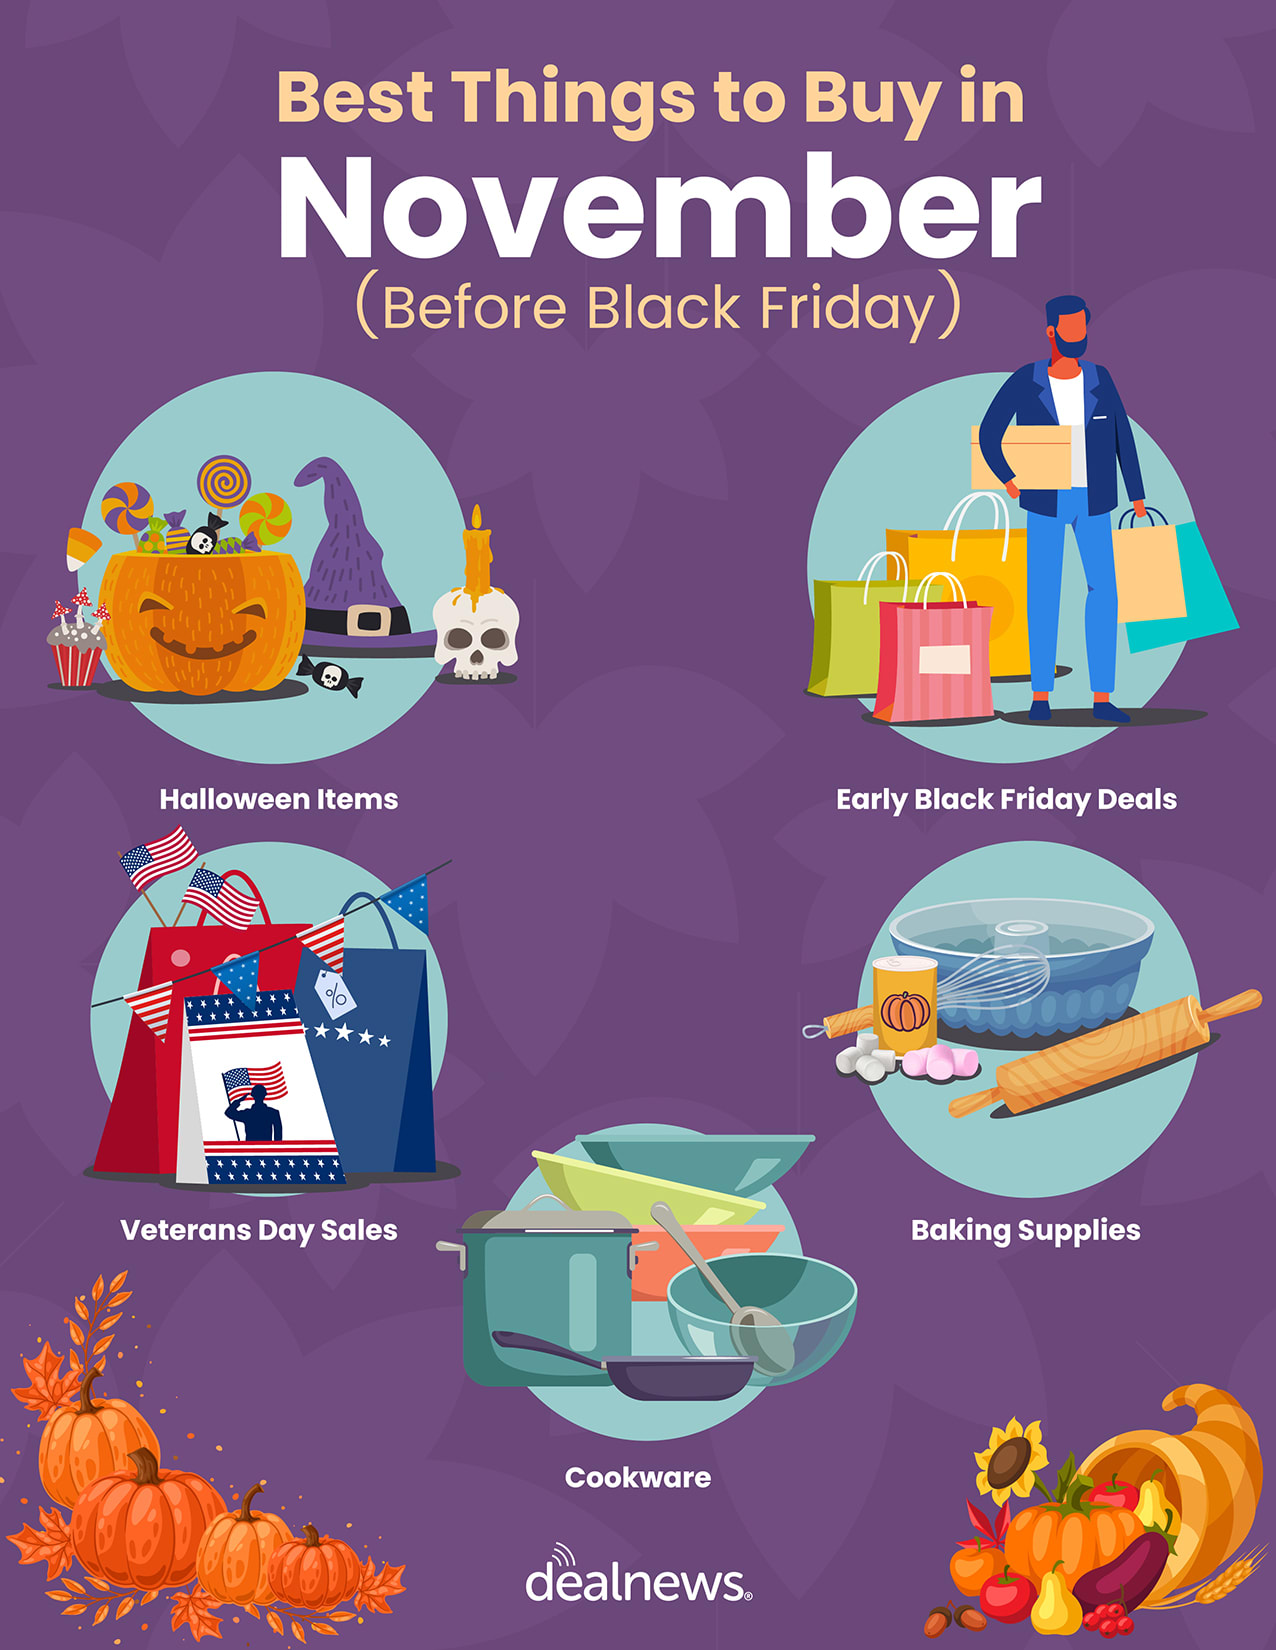 Five of the best buys of November shown in an infographic.